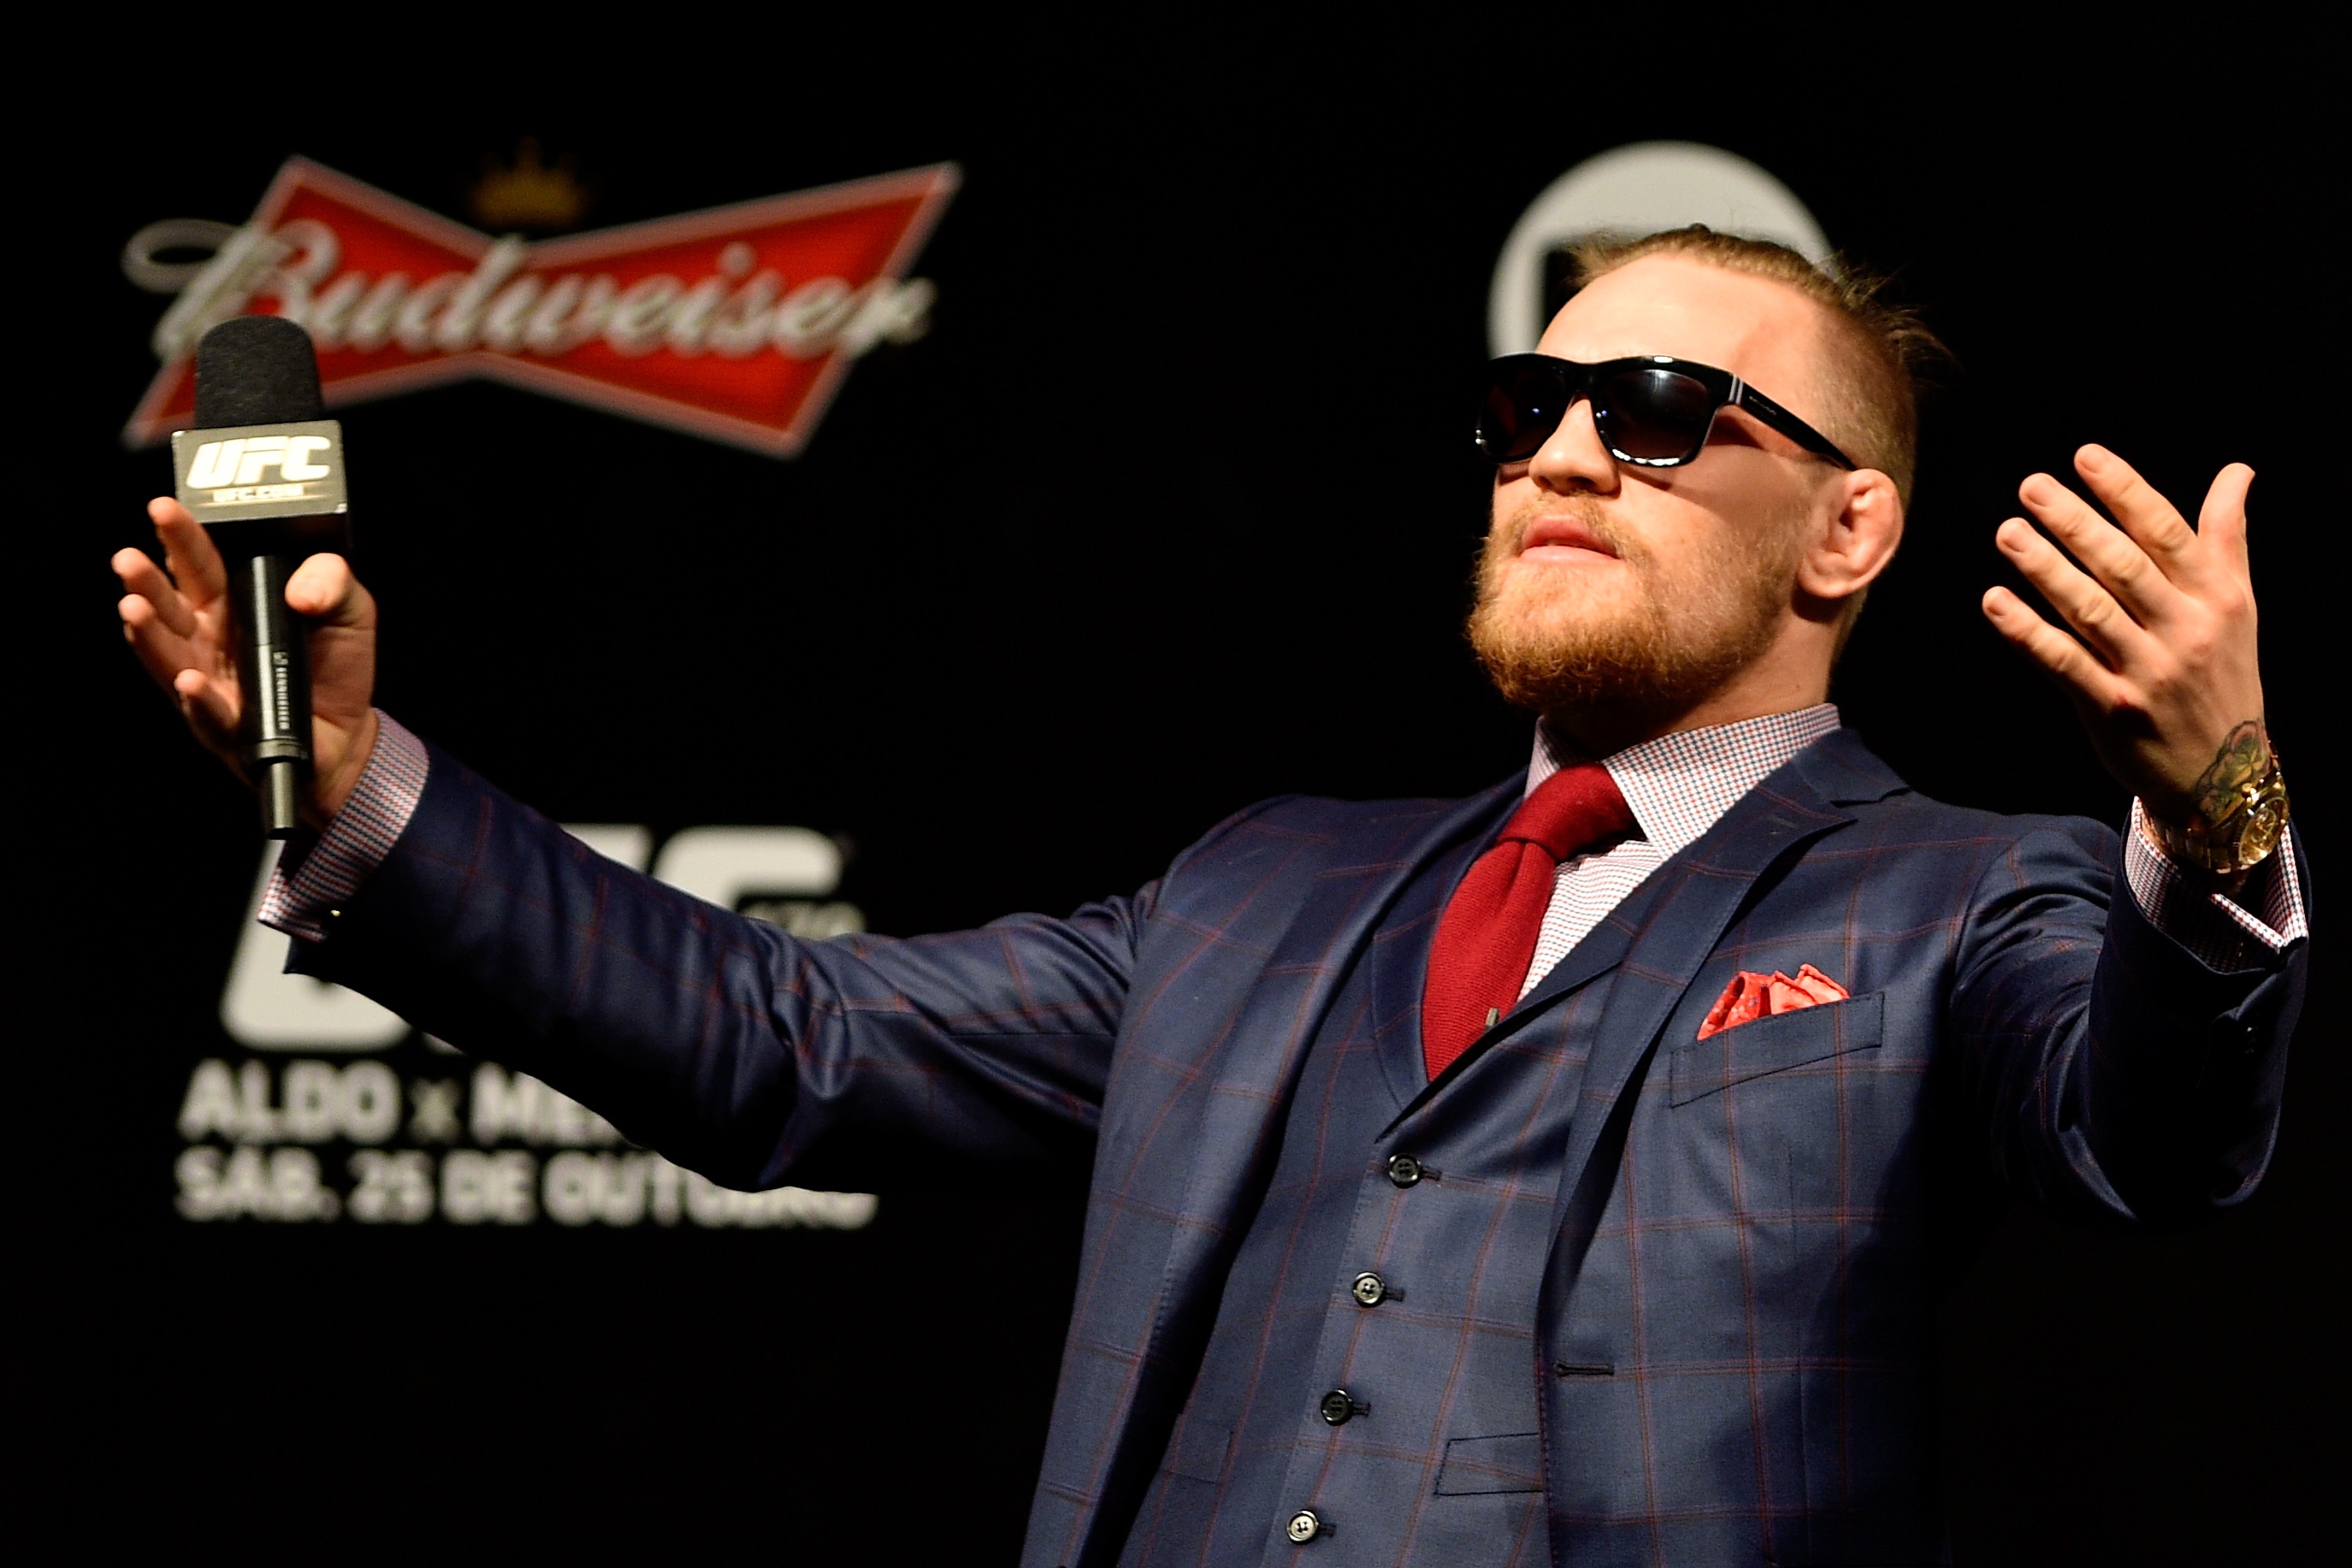 Conor McGregor plays to the crowd during a UFC press event. (Getty)